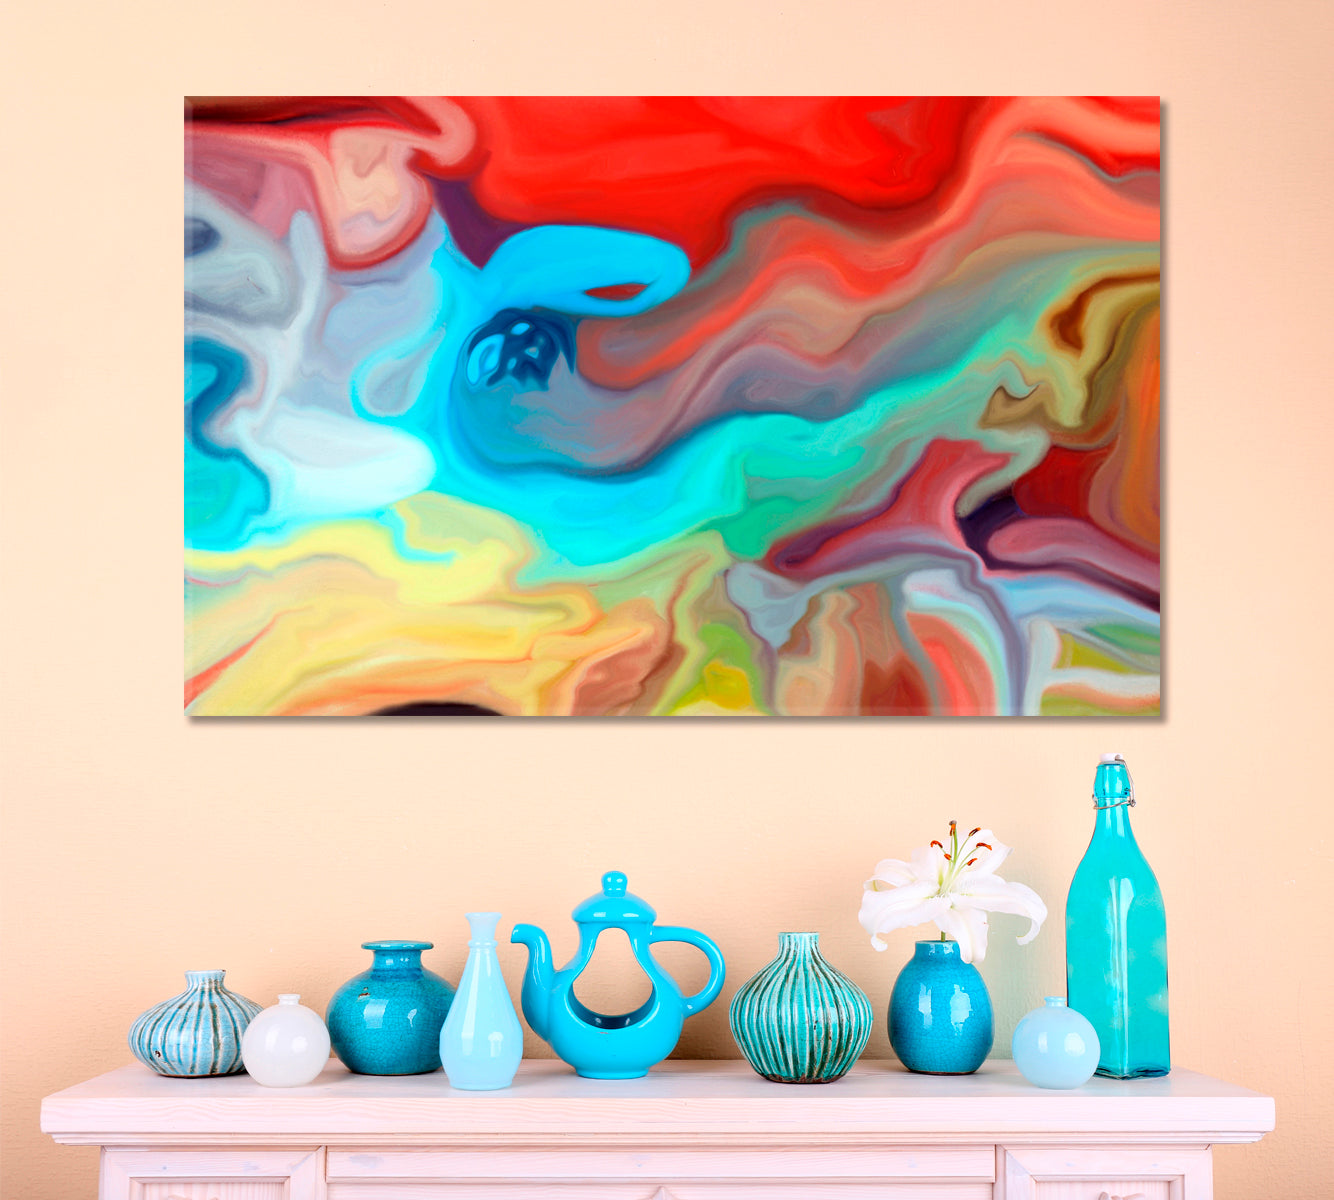 Modern Vivid Abstract Lines and Colors Abstract Art Print Artesty 1 panel 24" x 16" 